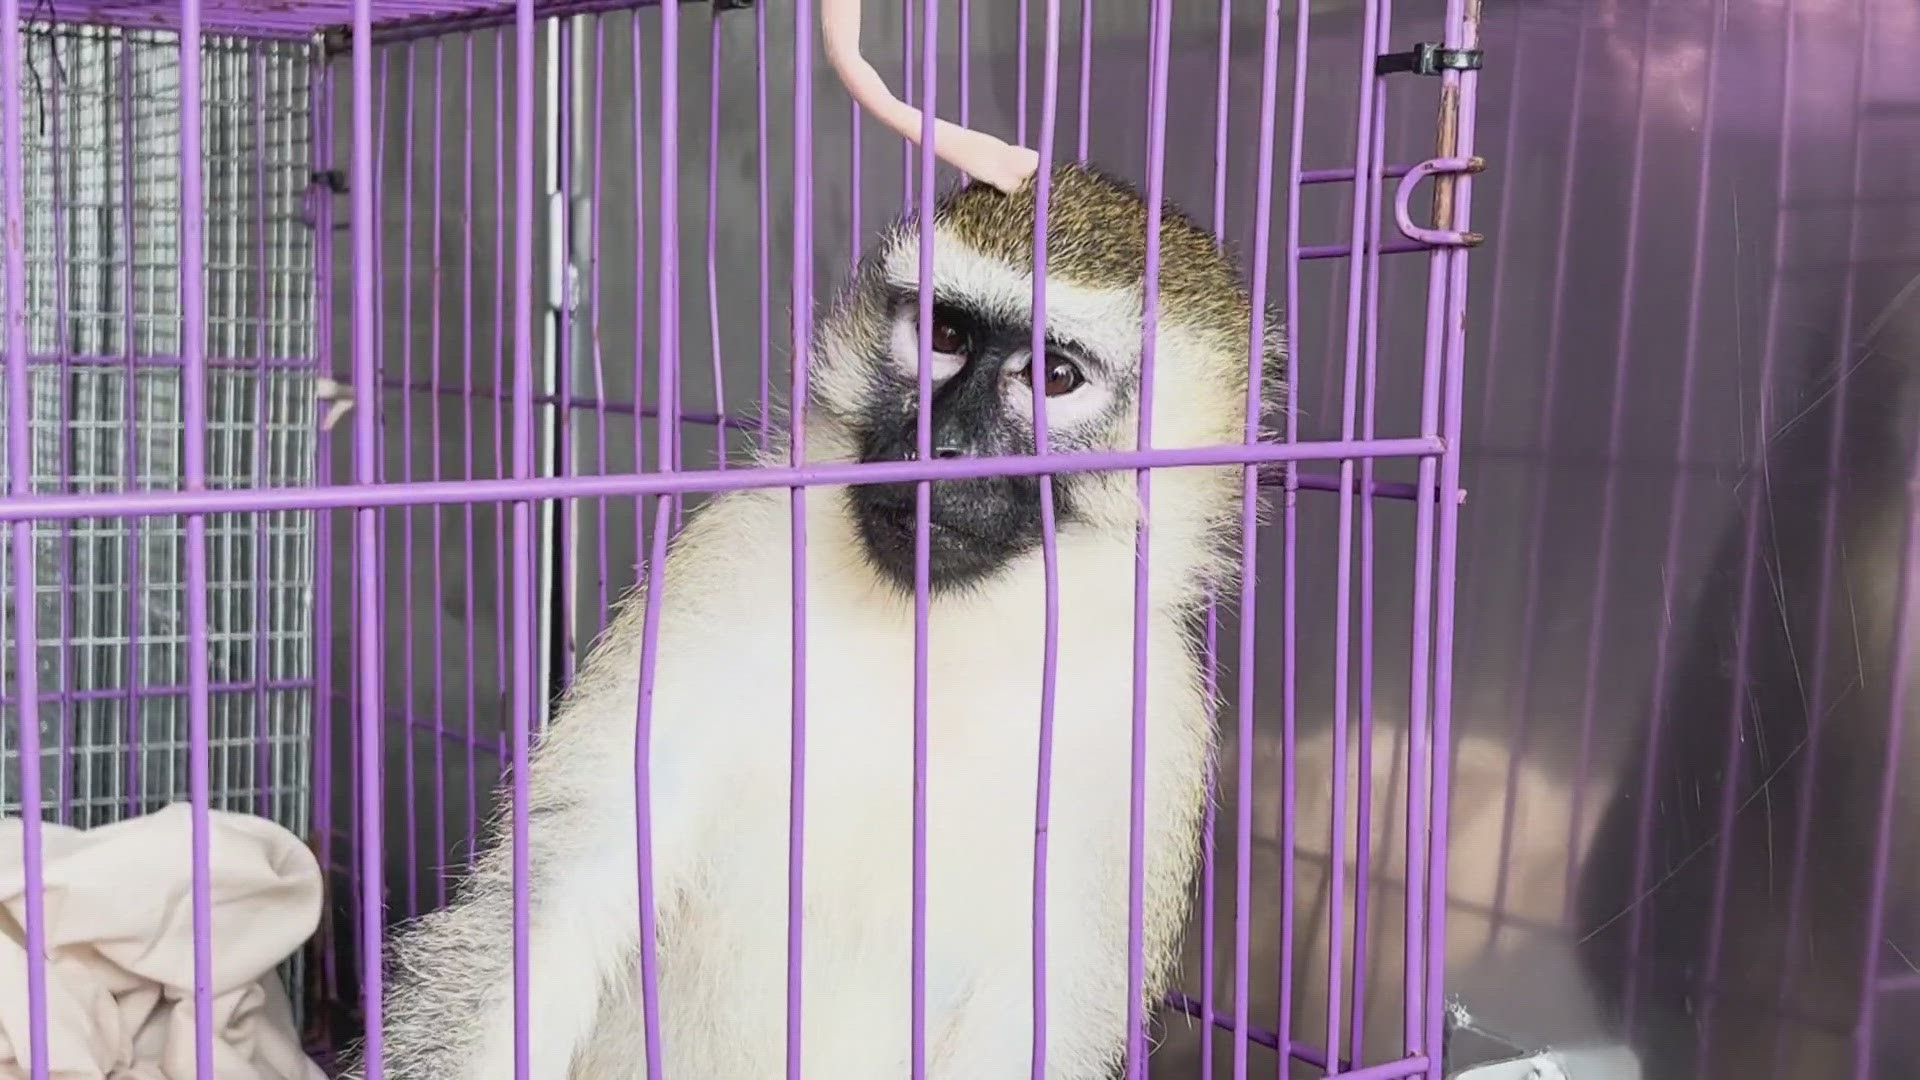 The Vervet monkey is now in ACS custody after biting the boy on the ear during a family gathering.